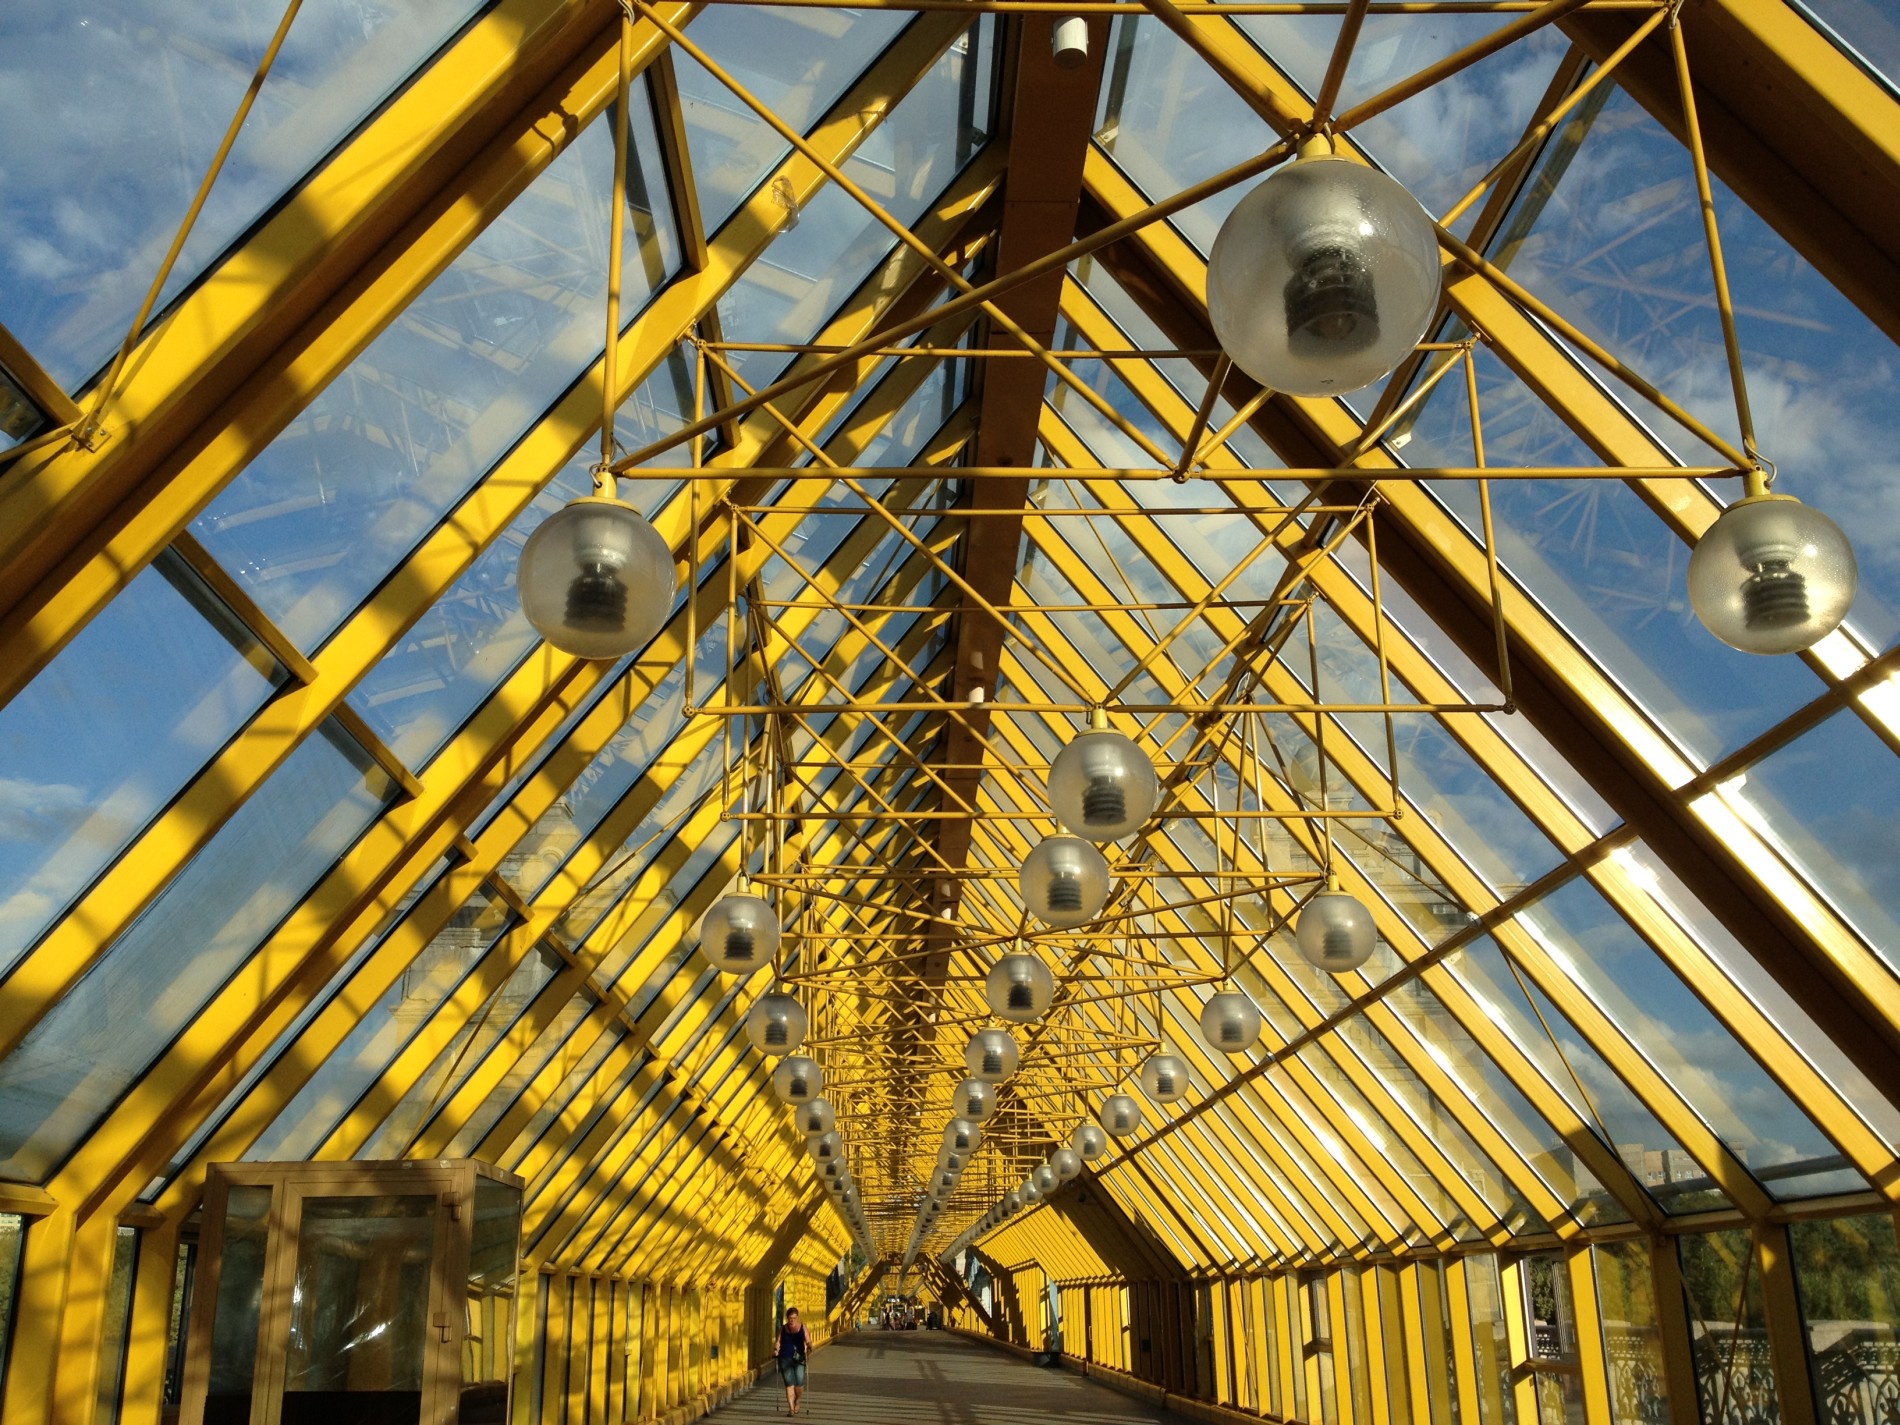 Bright yellow supports and industrial lights cover Andreyevsky (Andrew's) Bridge in Moscow.